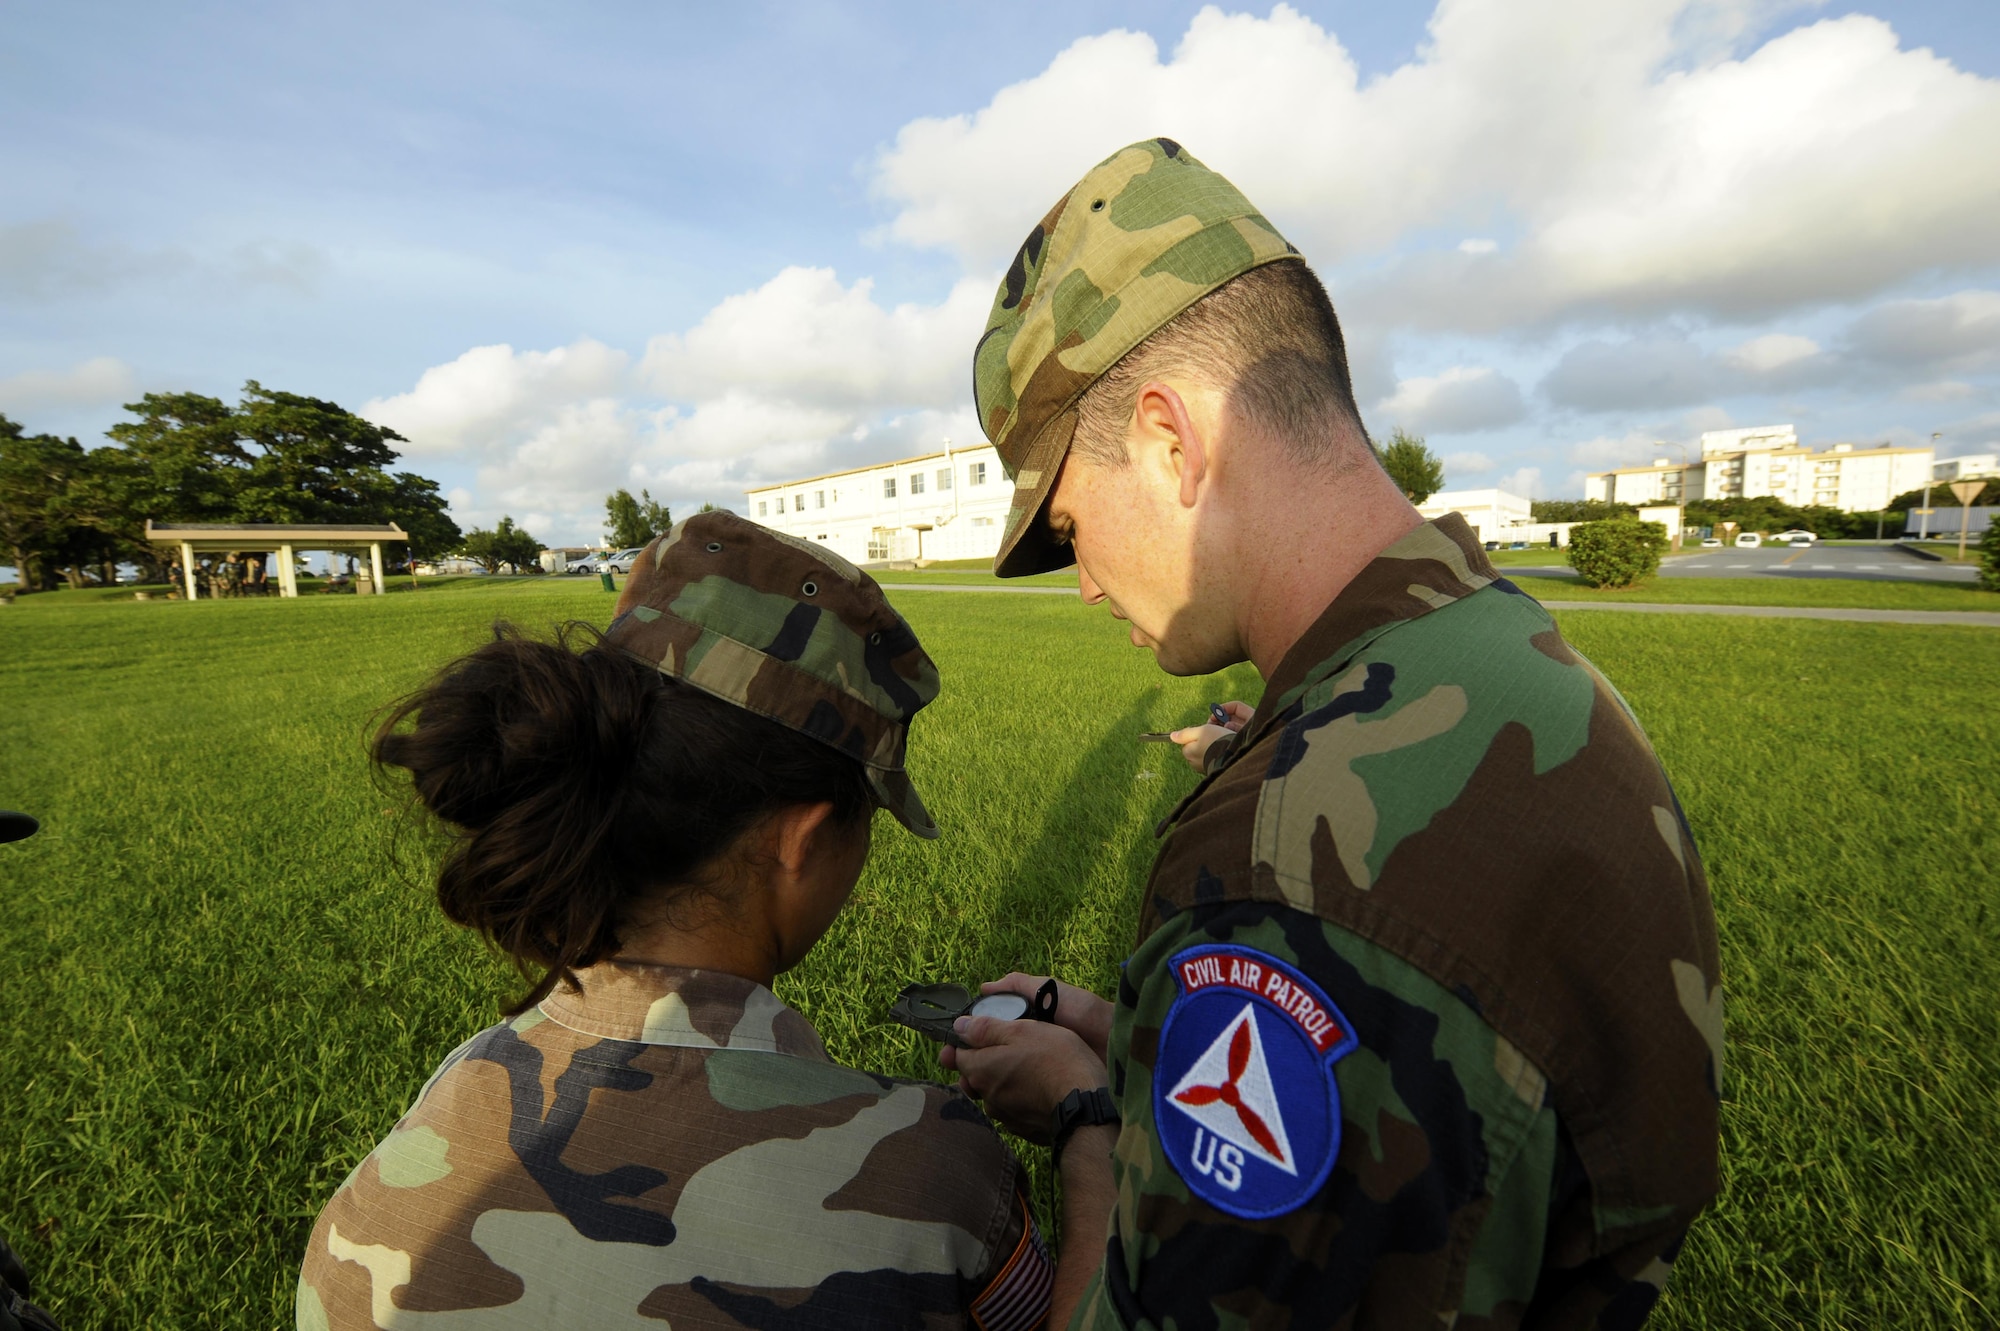 Senior Airman Chance Sheek (right), an 18th Logistics Readiness Squadron vehicle operator, teaches a young cadet in the Civil Air Patrol how to use a compass on Kadena Air Base, Japan, June 26, 2015. Sheek is now a first lieutenant in the CAP and is held responsible for ground emergency training such as search and rescue. (U.S. Air Force photo/Airman 1st Class Zackary A. Henry)